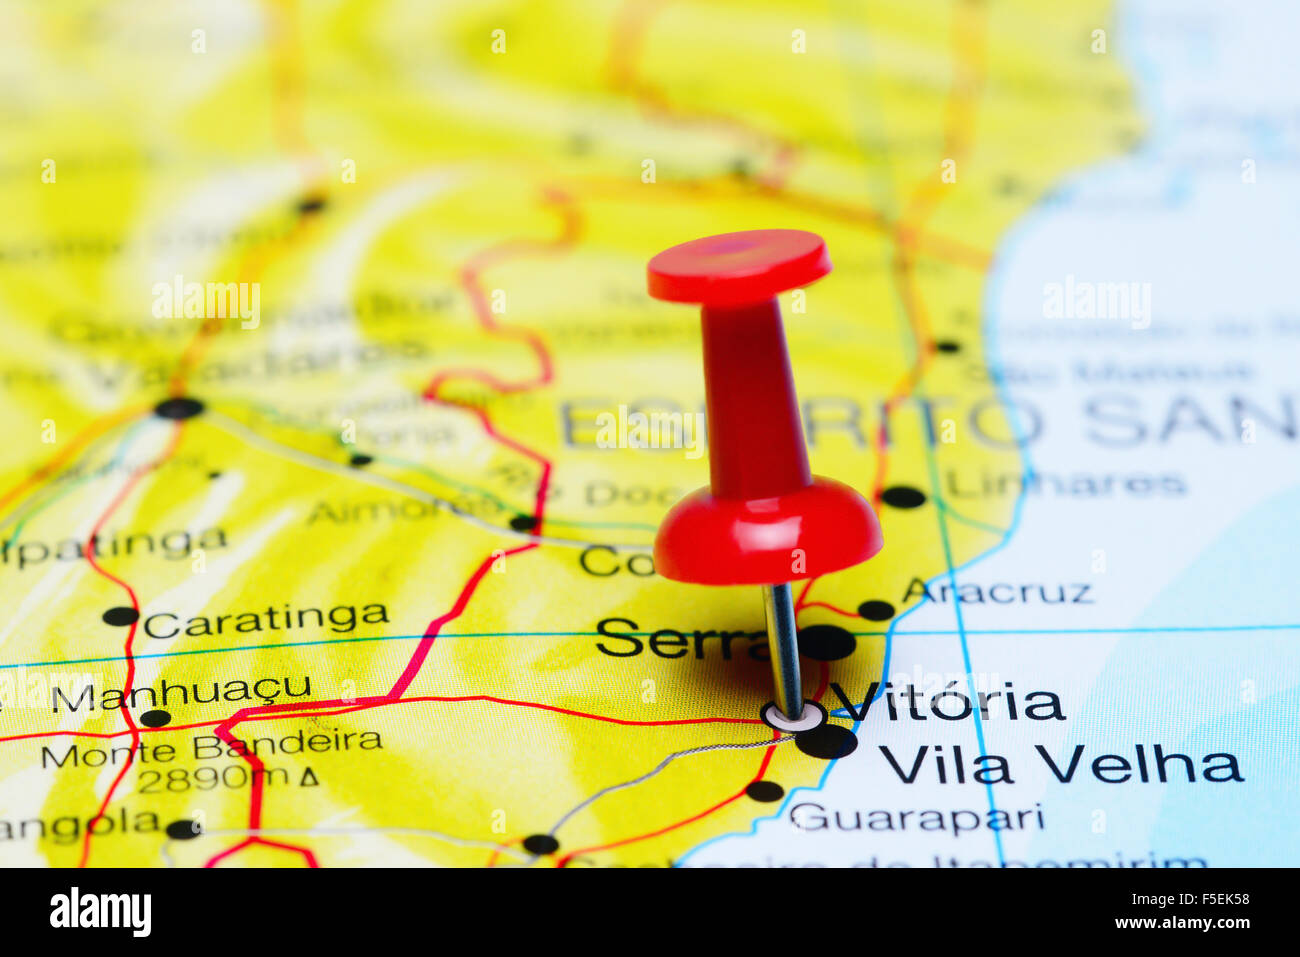 Vitoria pinned on a map of Brazil Stock Photo